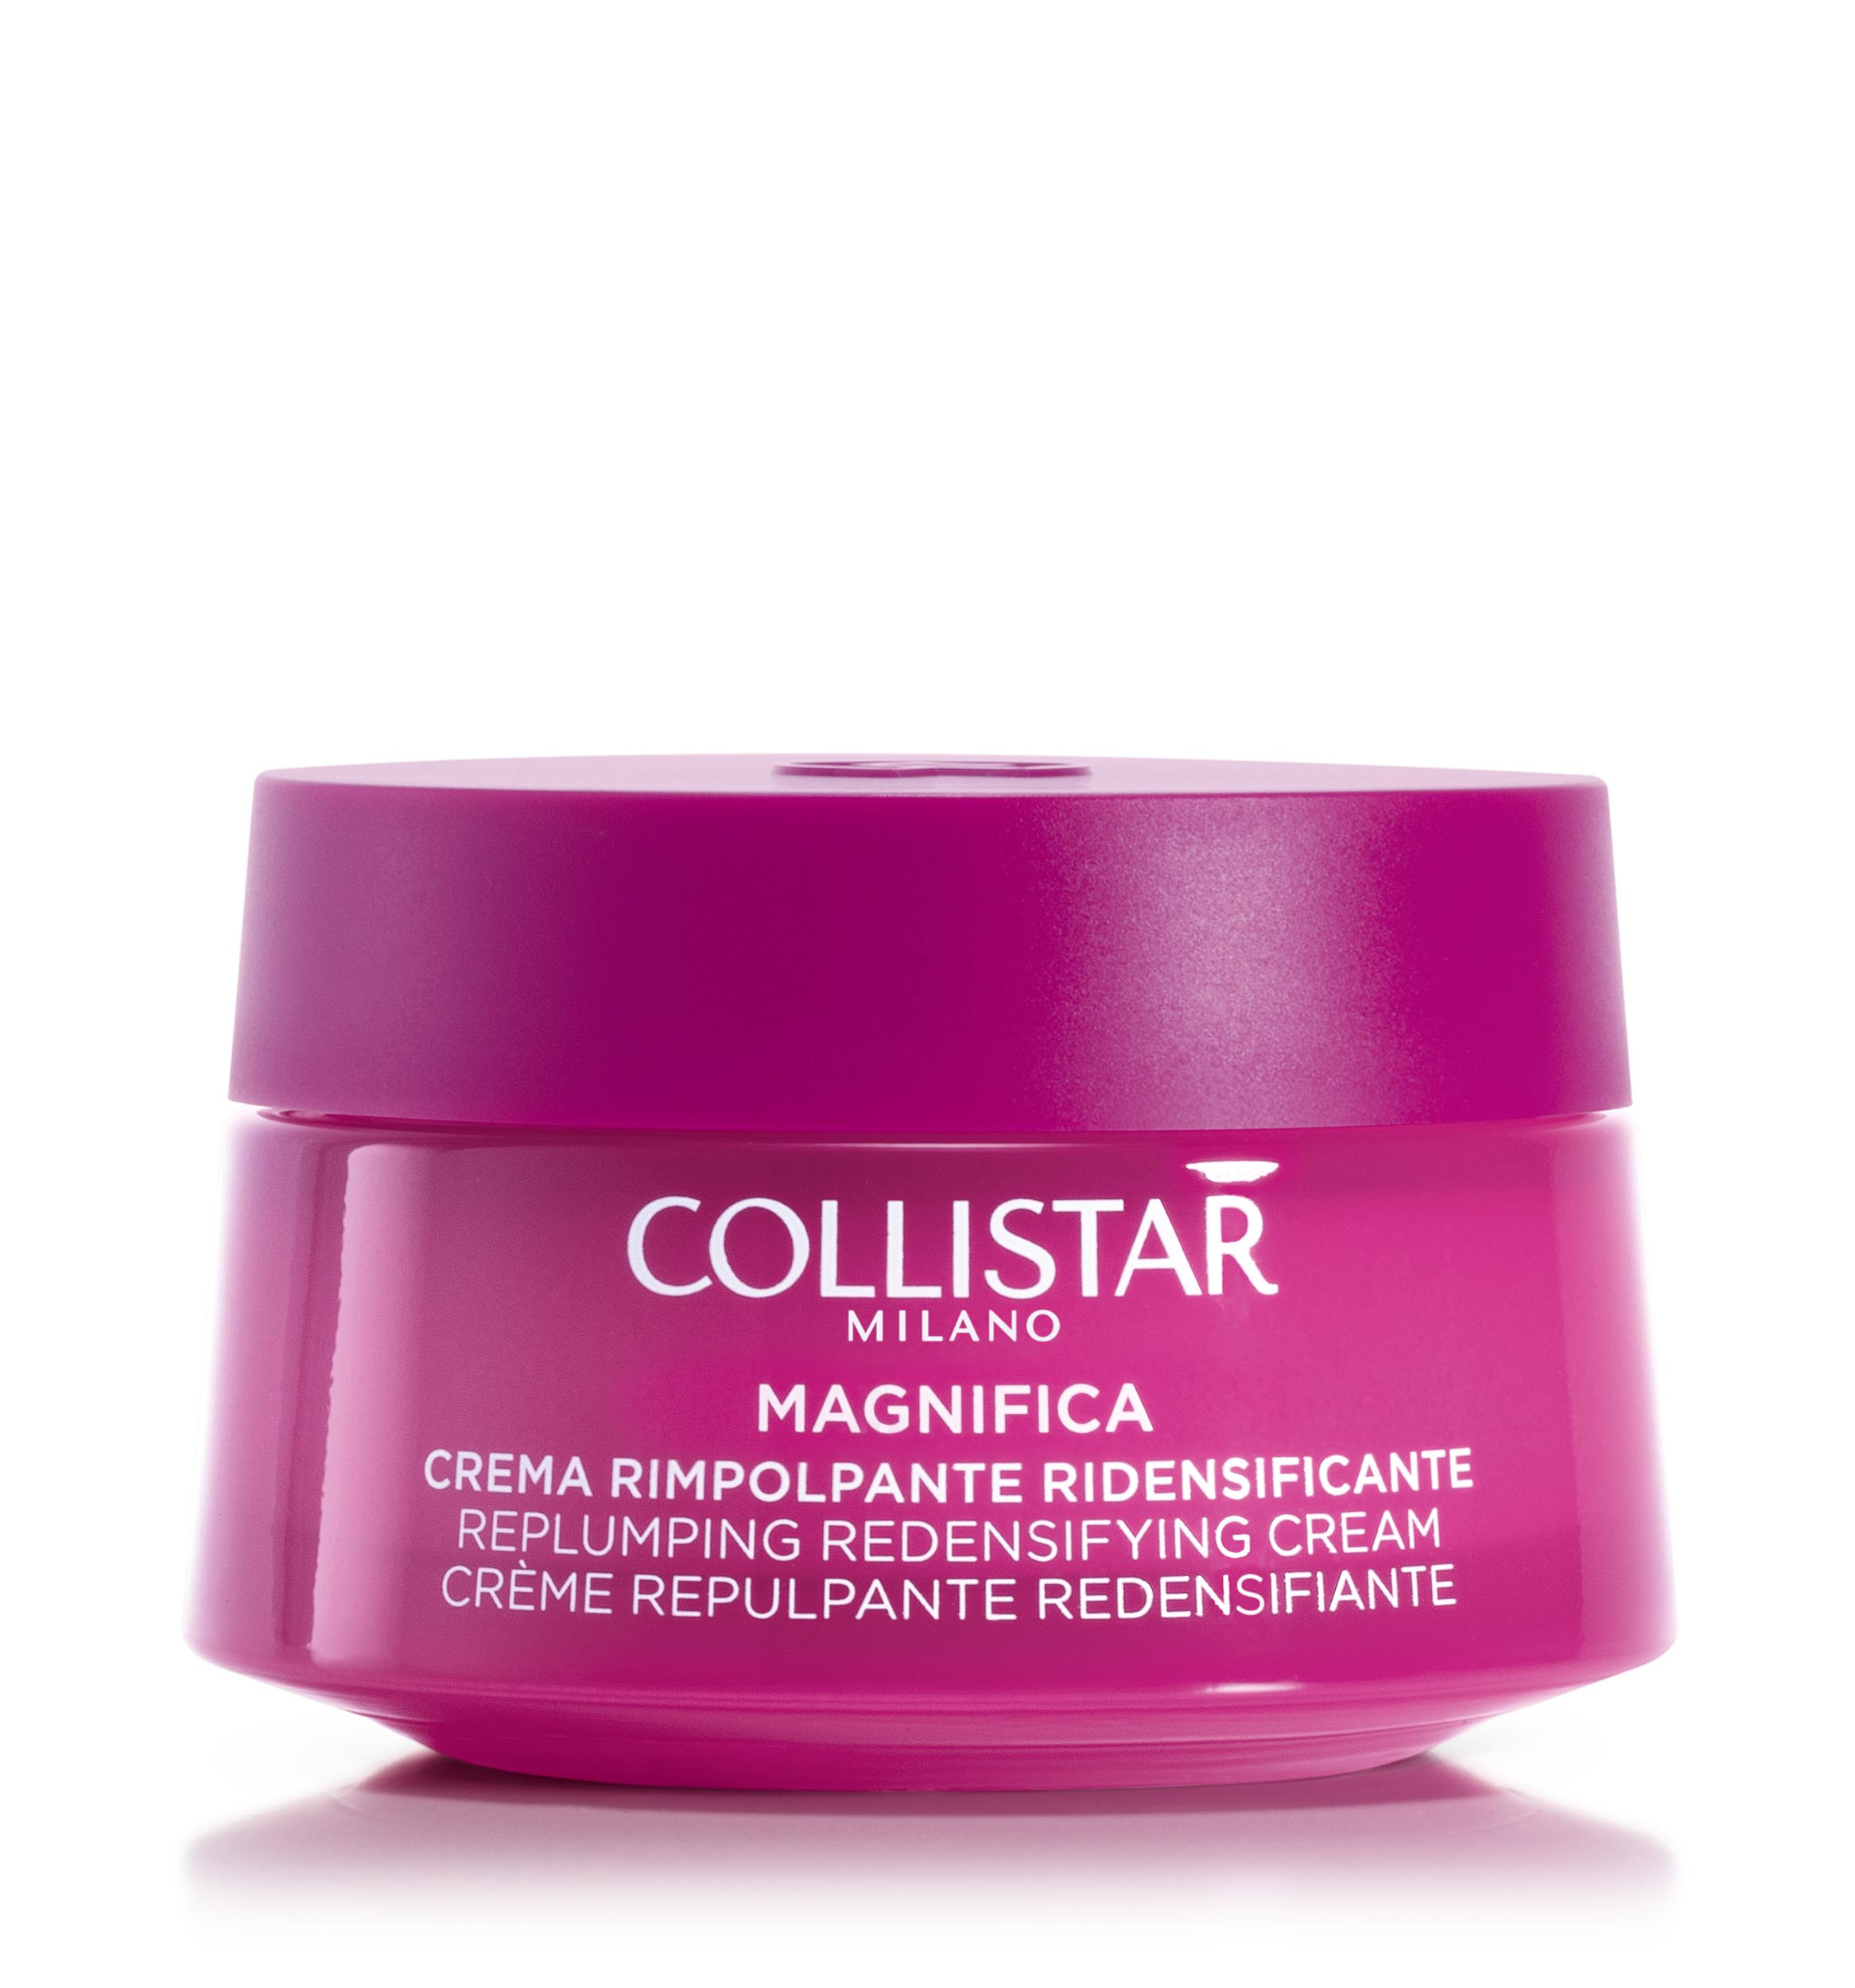 Collistar Magnifica Replumping Redensifying Cream Face And Neck, 50ml